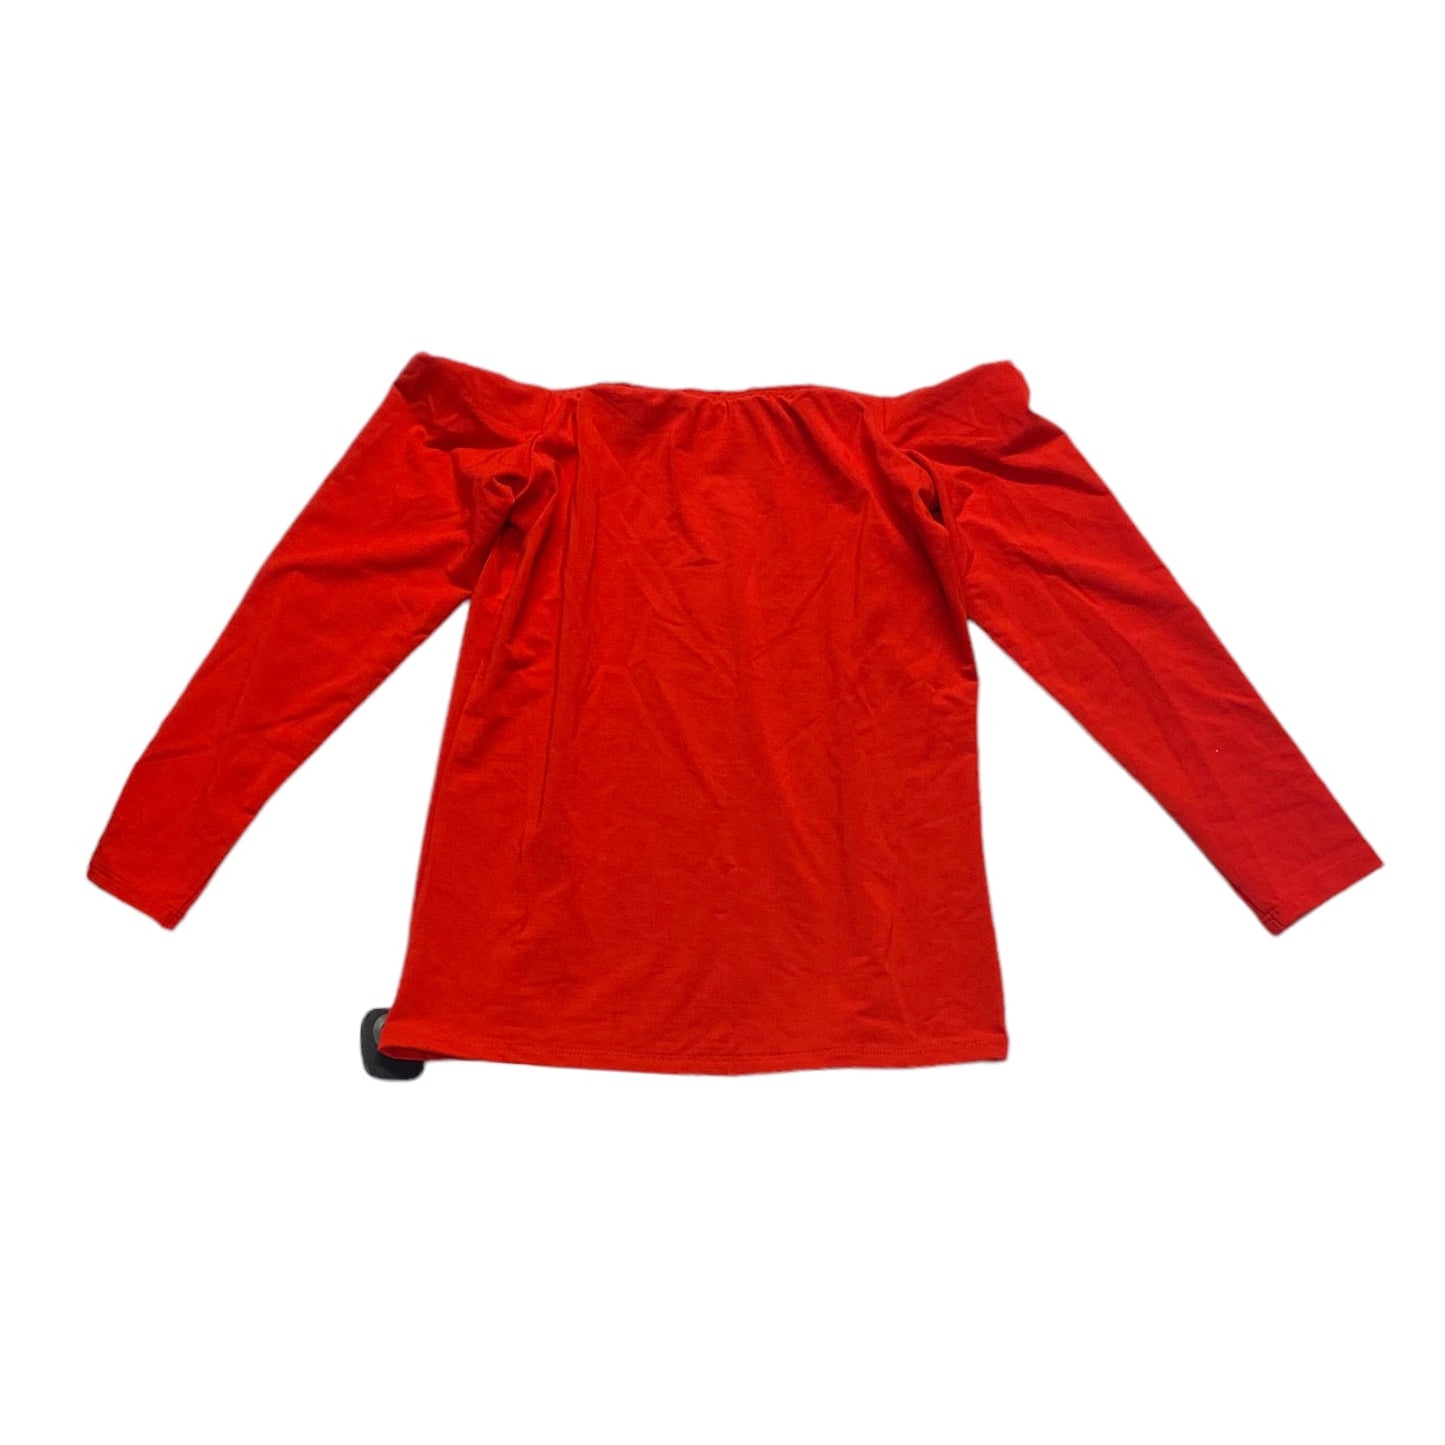 Red Top 3/4 Sleeve HATCH, Size S